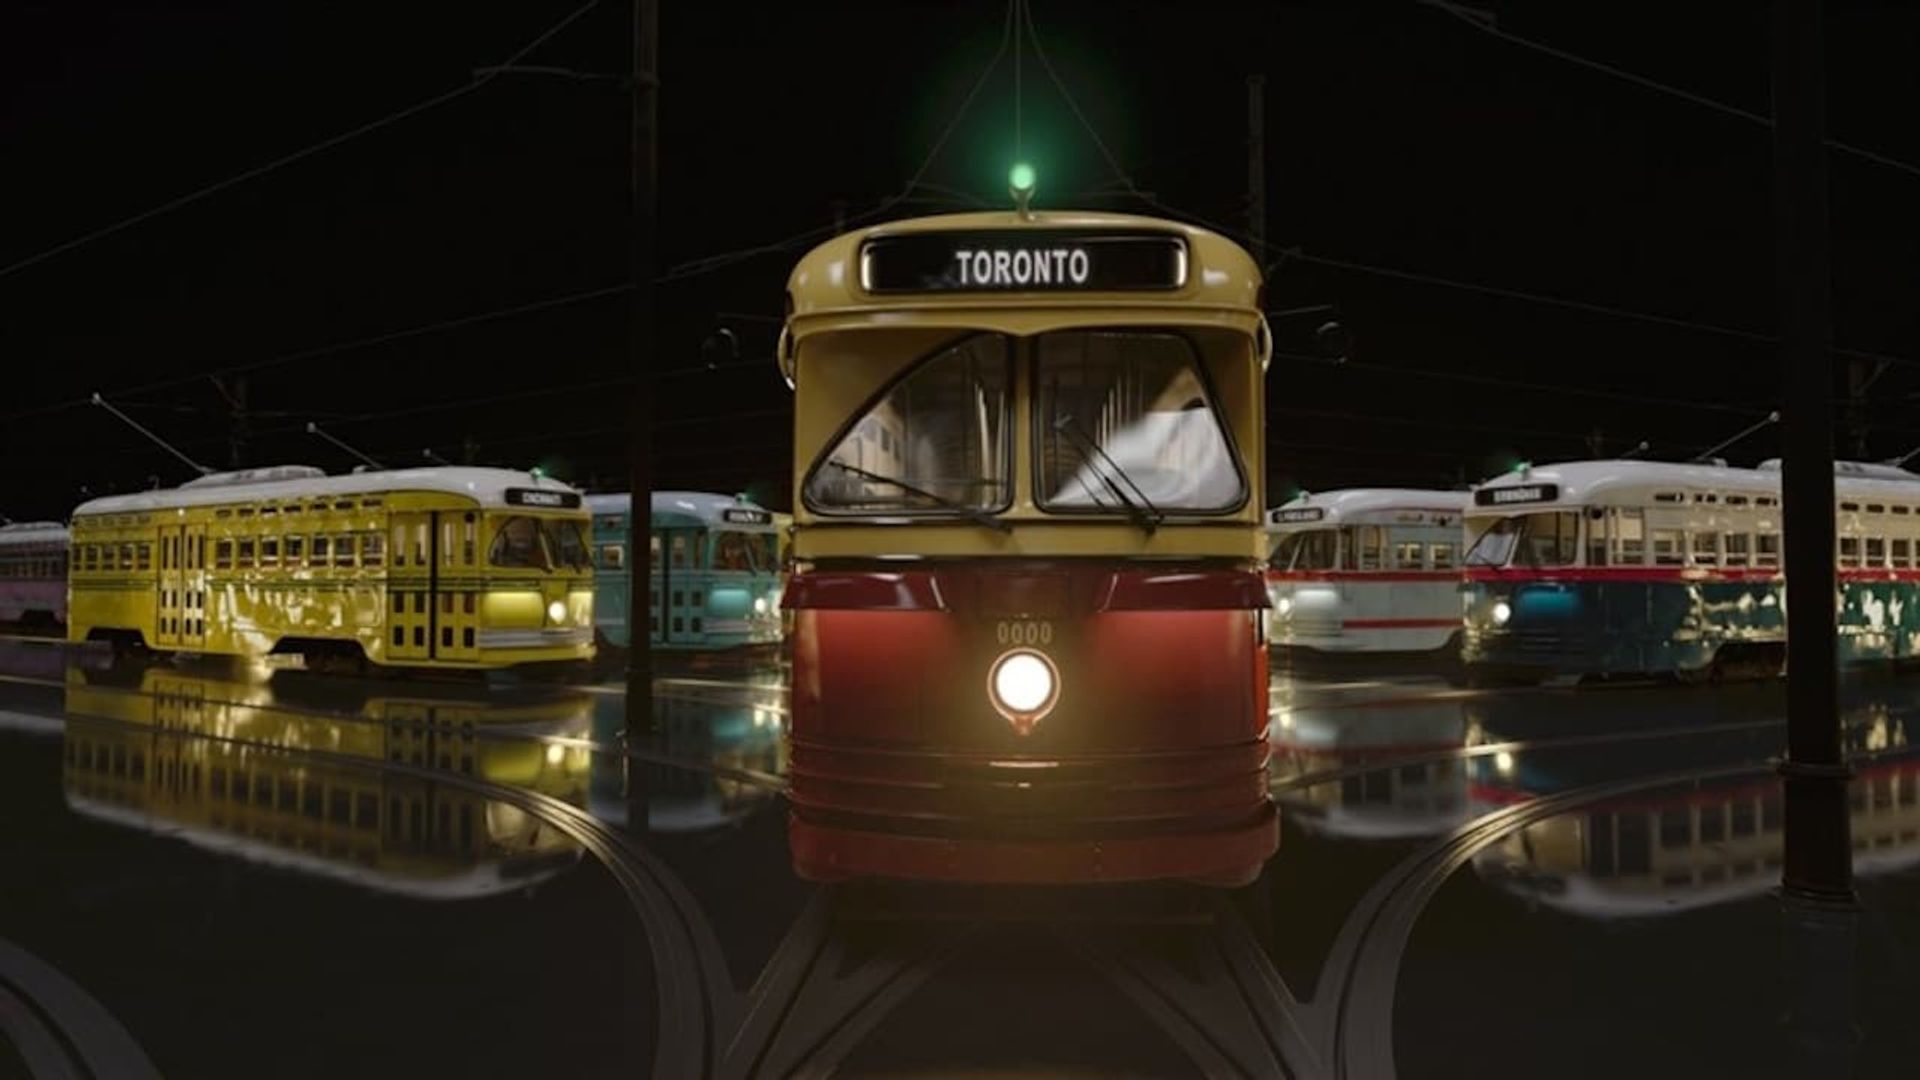 The Trolley background